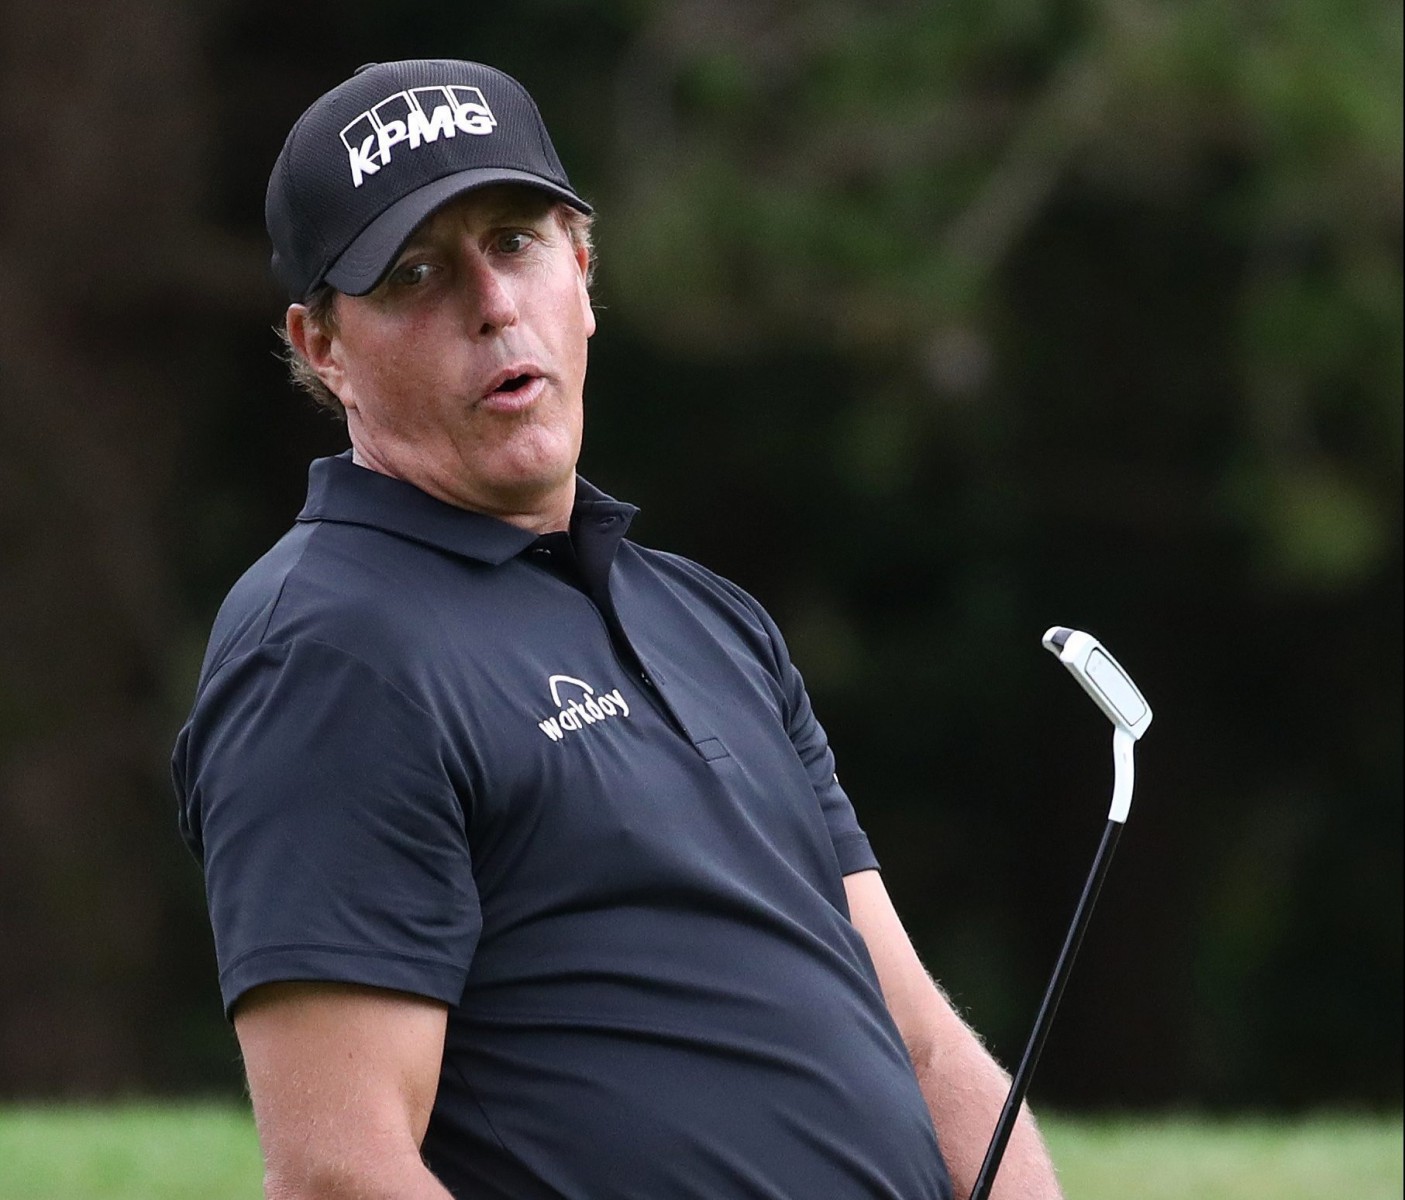 , Phil Mickelson drops out of worlds top 50 for first time in 26 years after HSBC Champions event in China